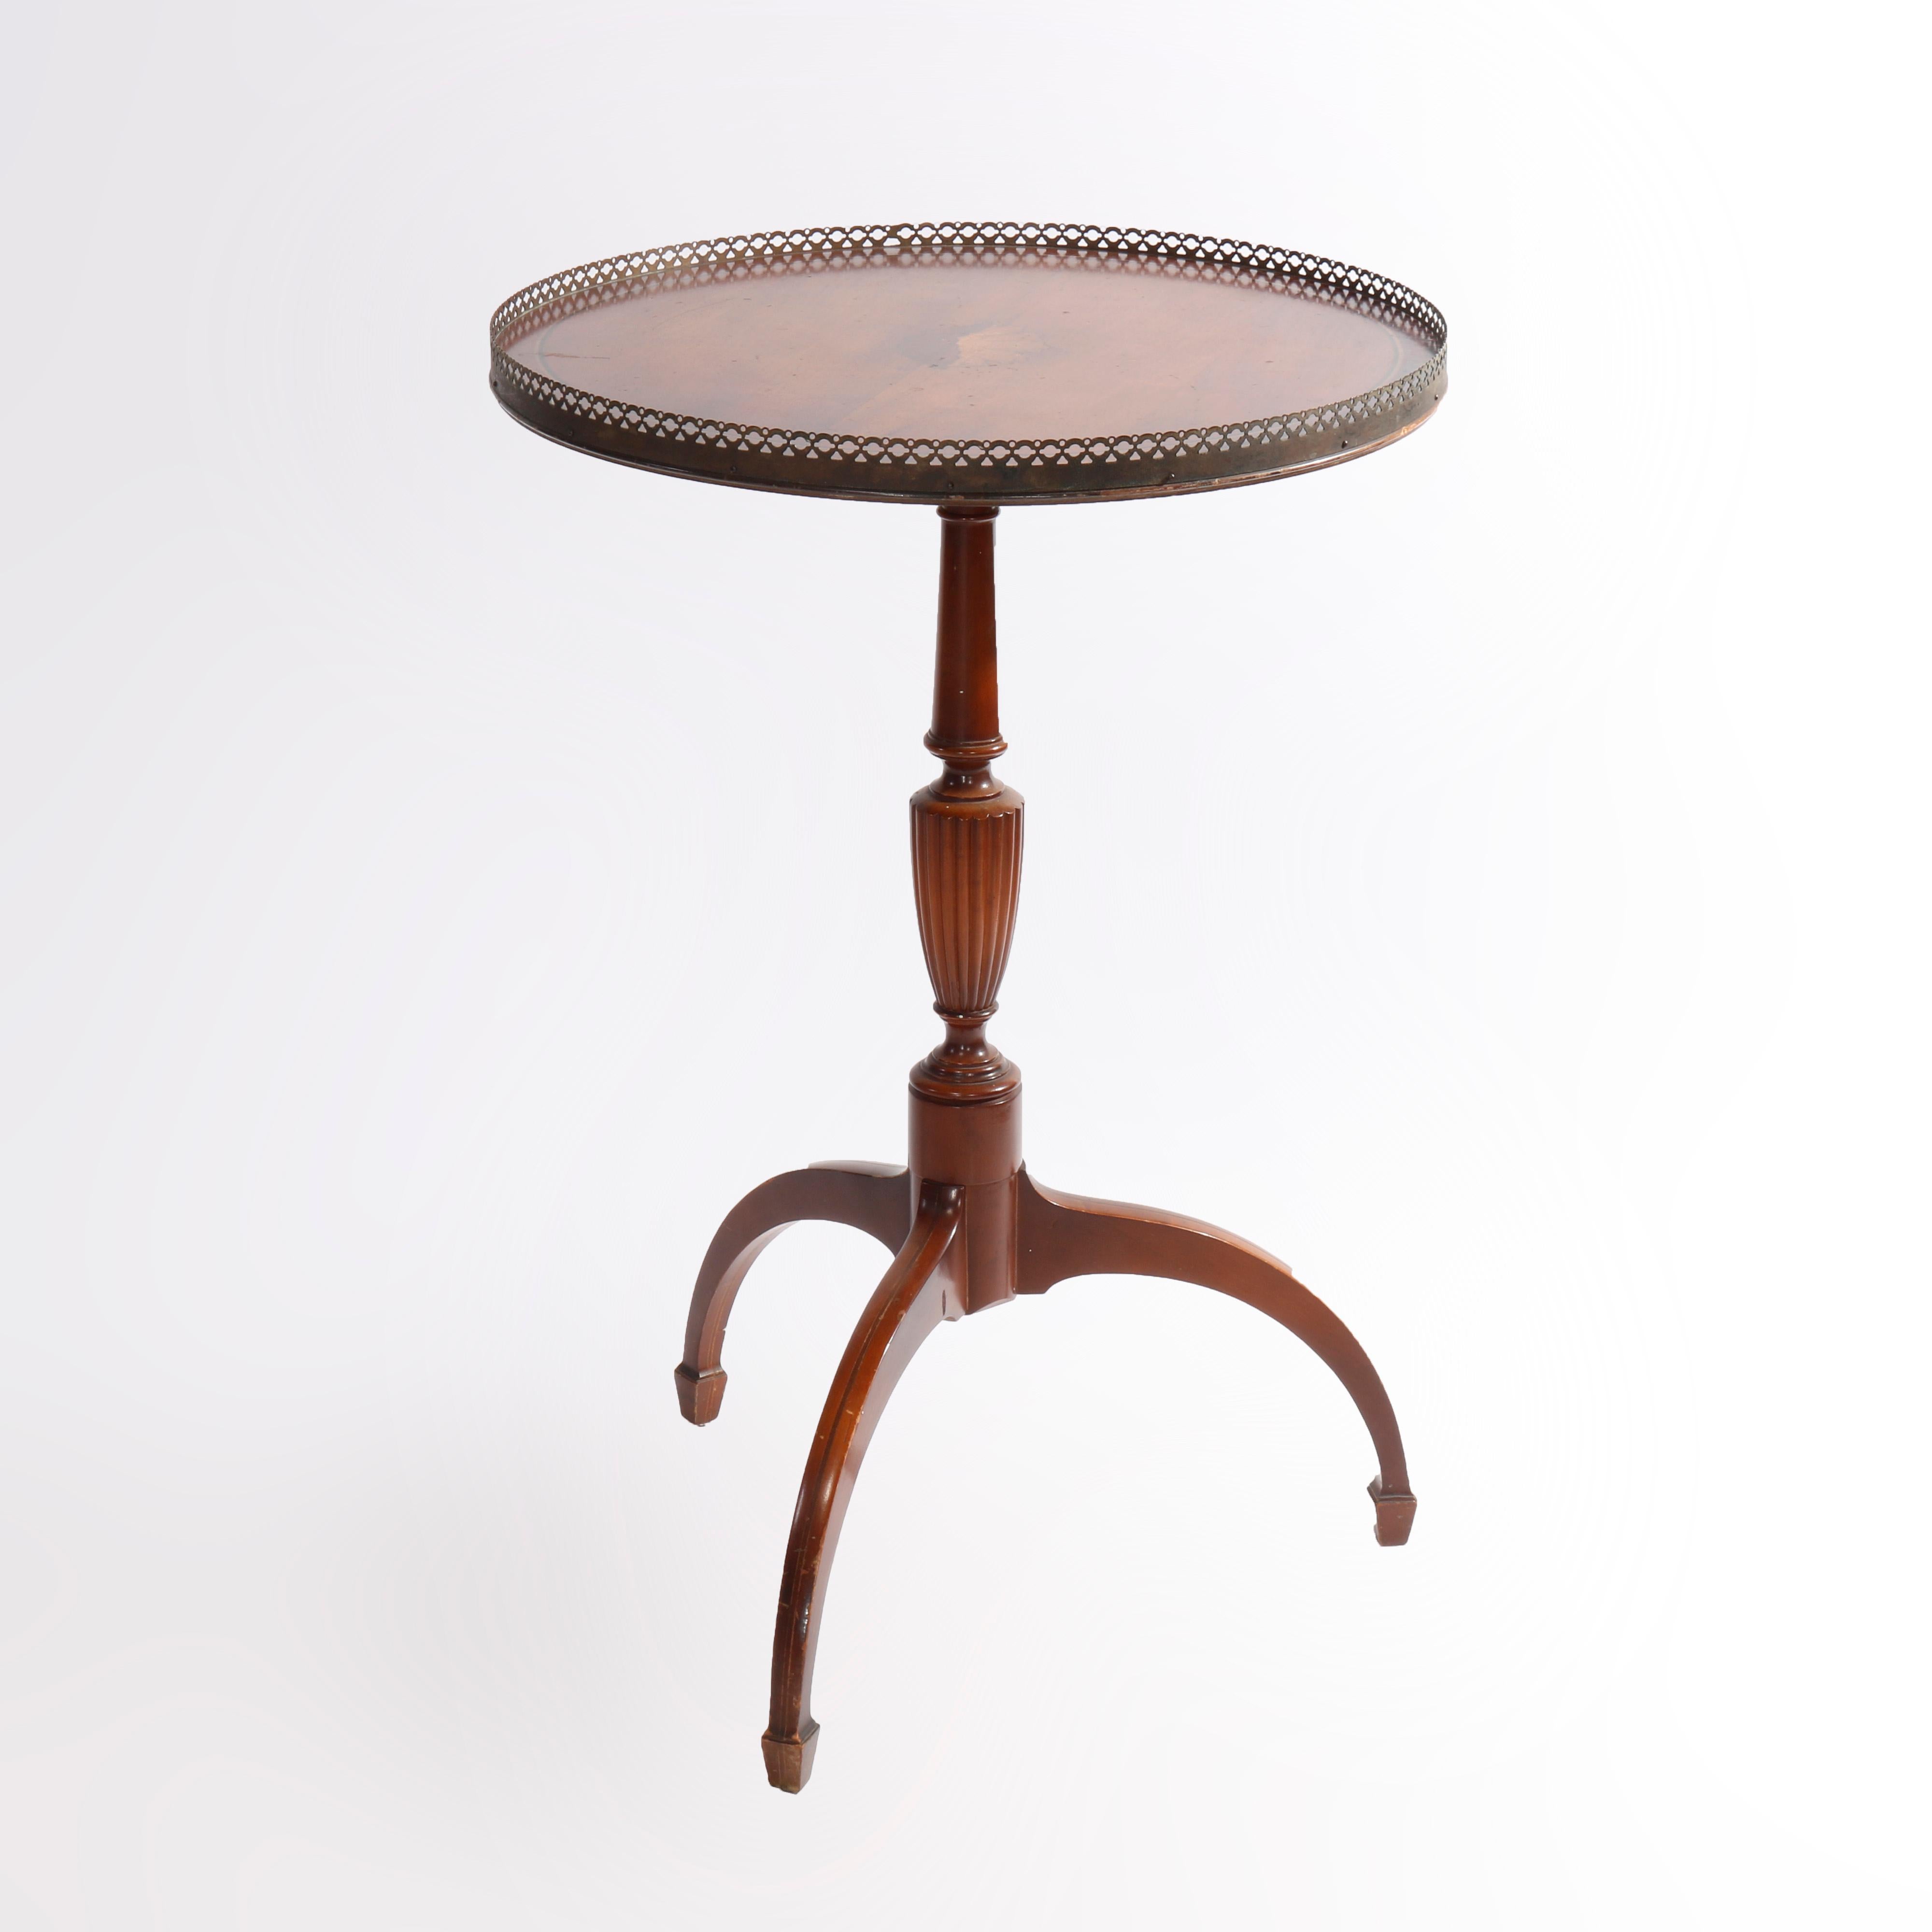 English Regency Mahogany Spider Leg Parlor Table with Inlay Shell Center, c1930 In Good Condition For Sale In Big Flats, NY